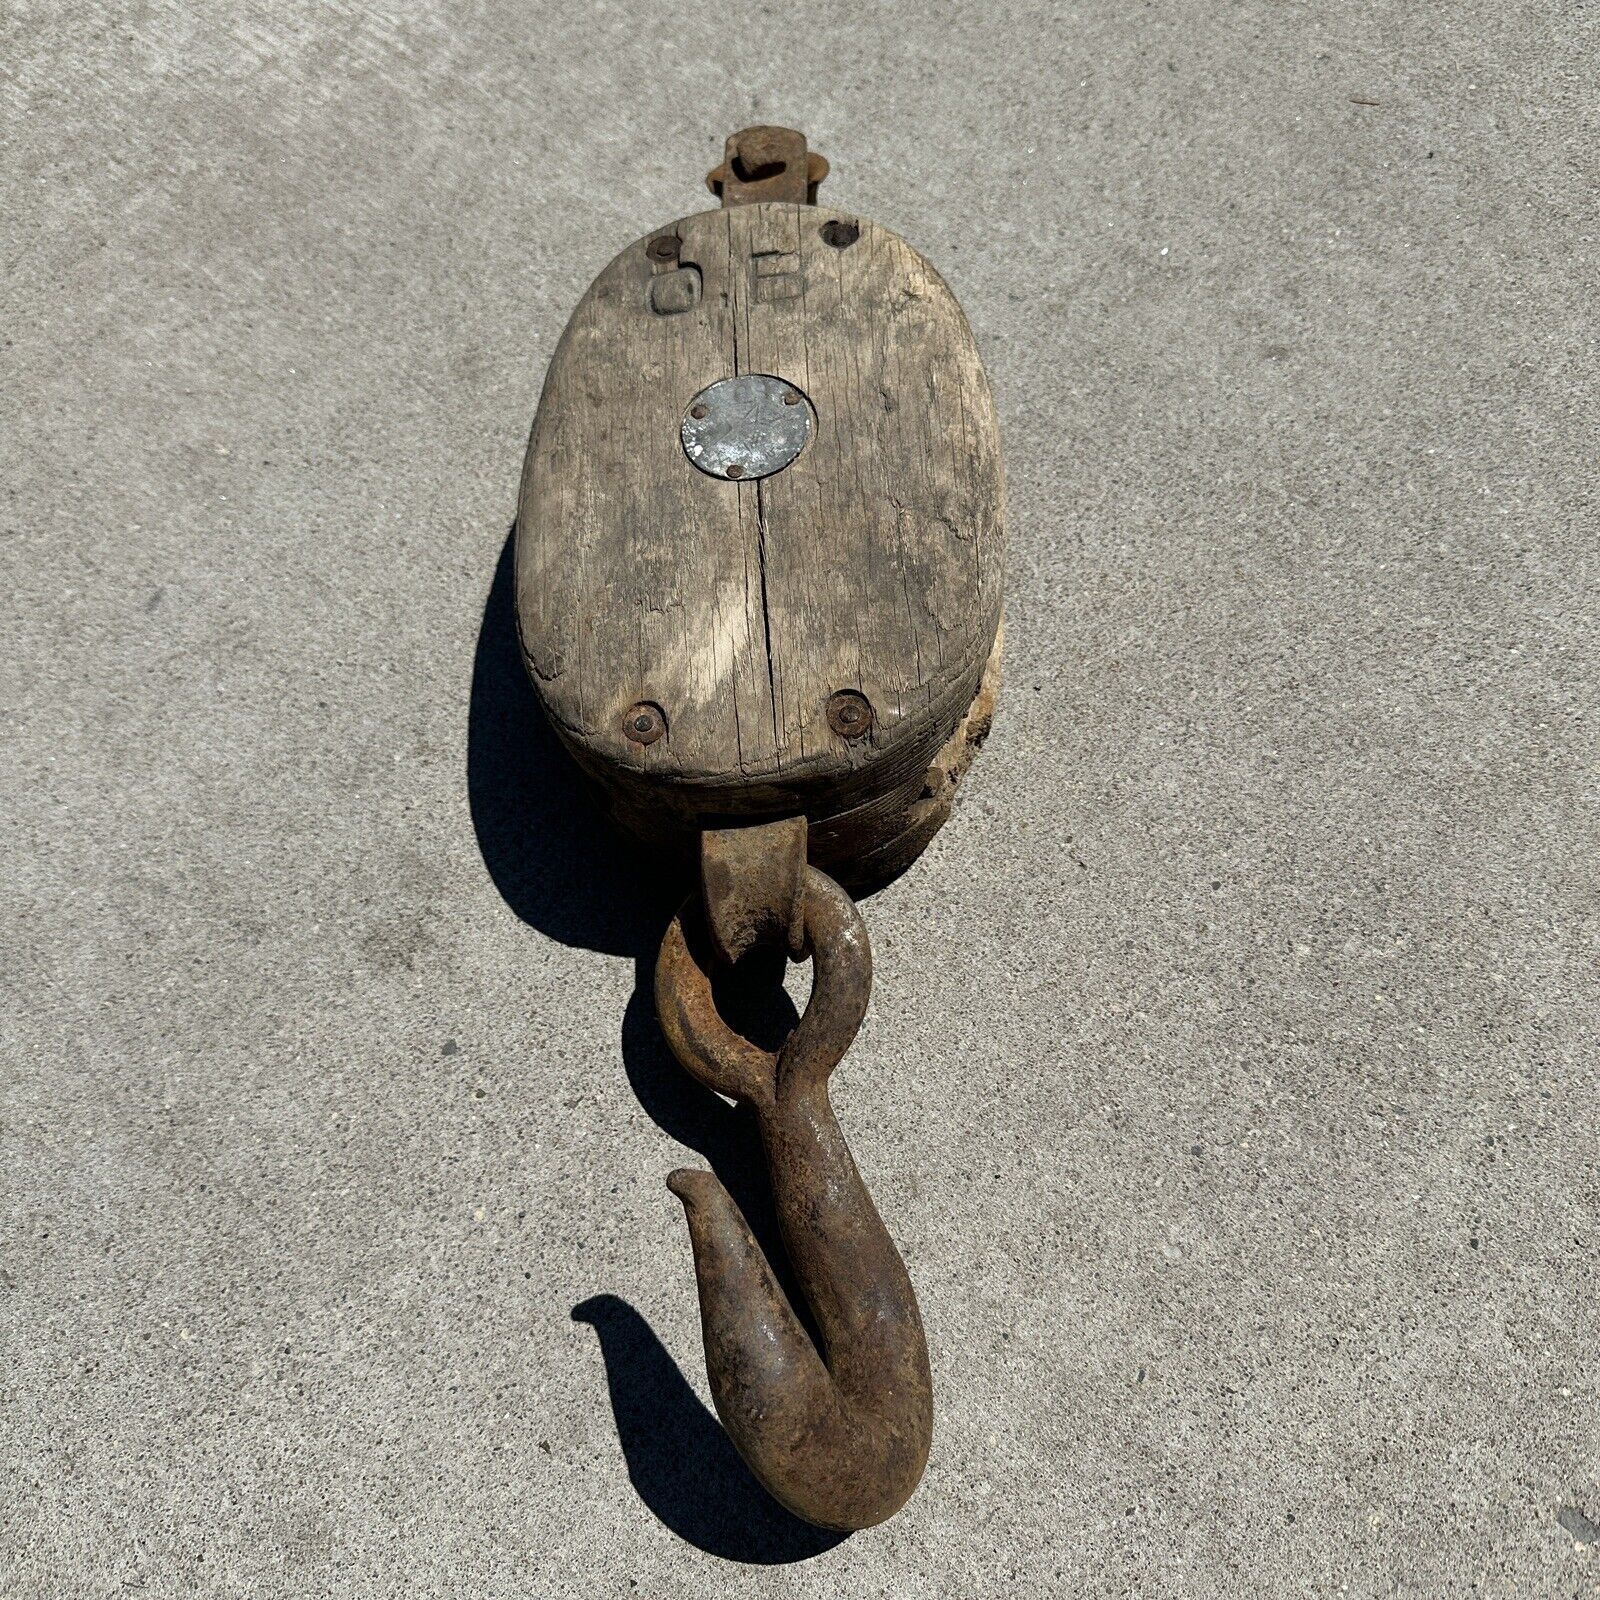 Vtg Barn Pulley Wood Block Tackle Single Pulley Iron Barn Hook Large 21” Overall